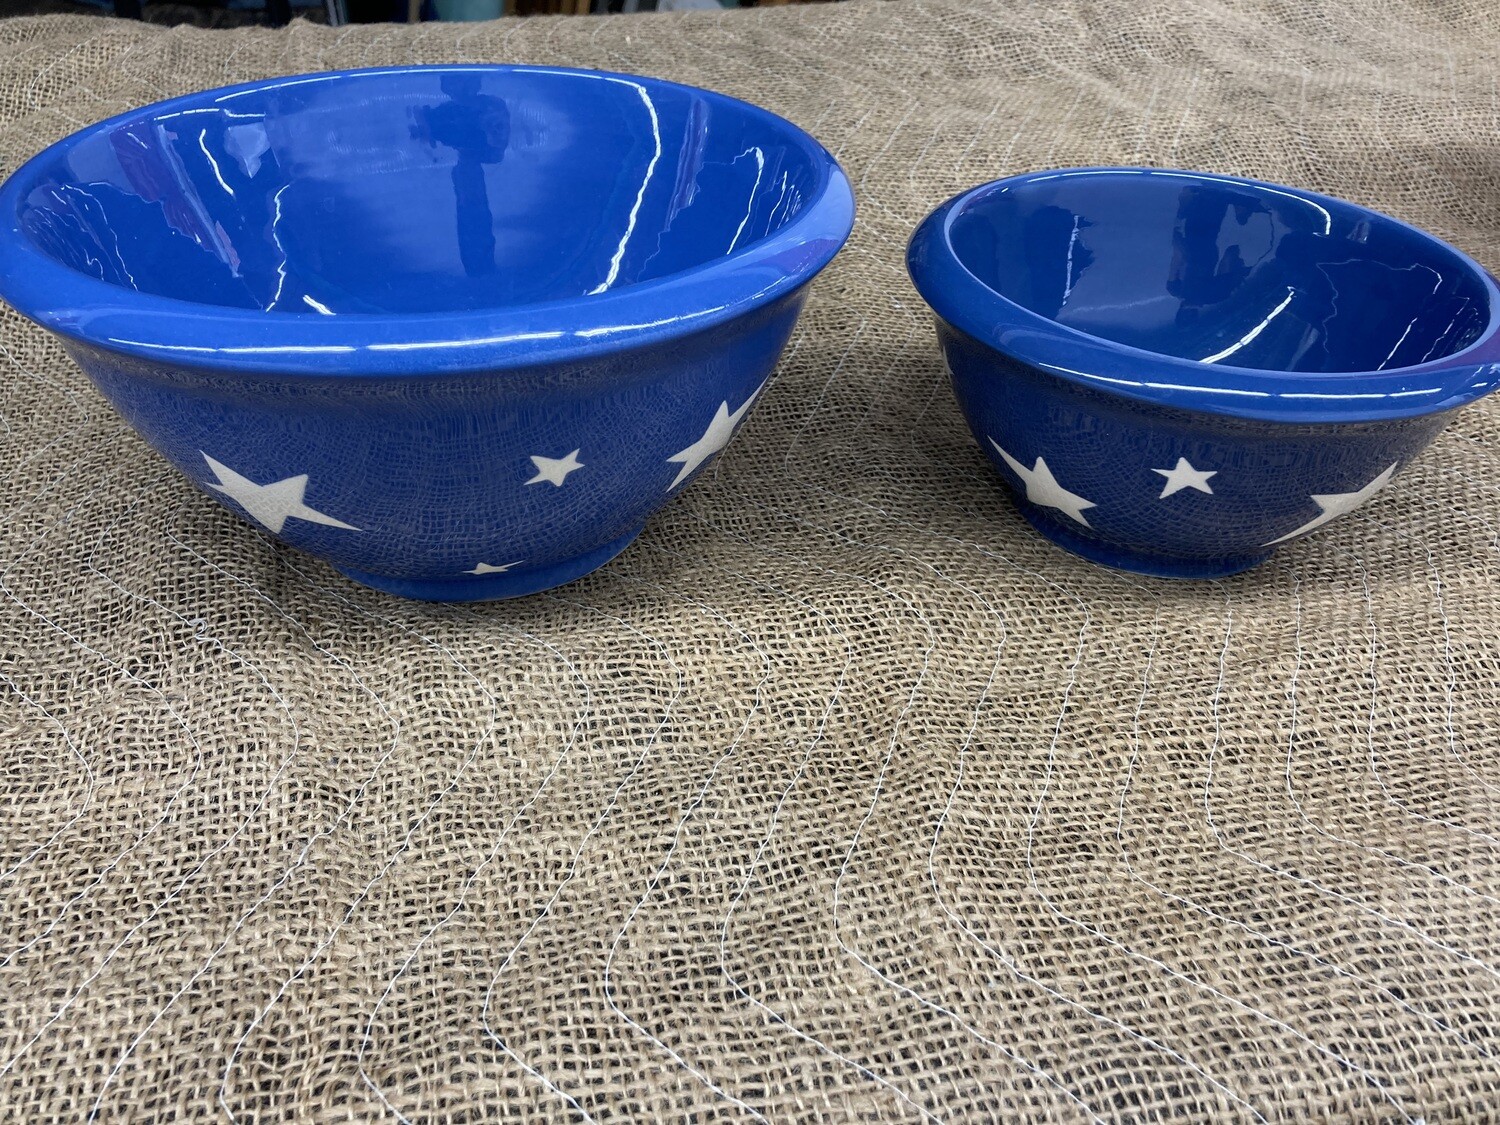 Terramoto Serving Bowls, blue with white stars #2314